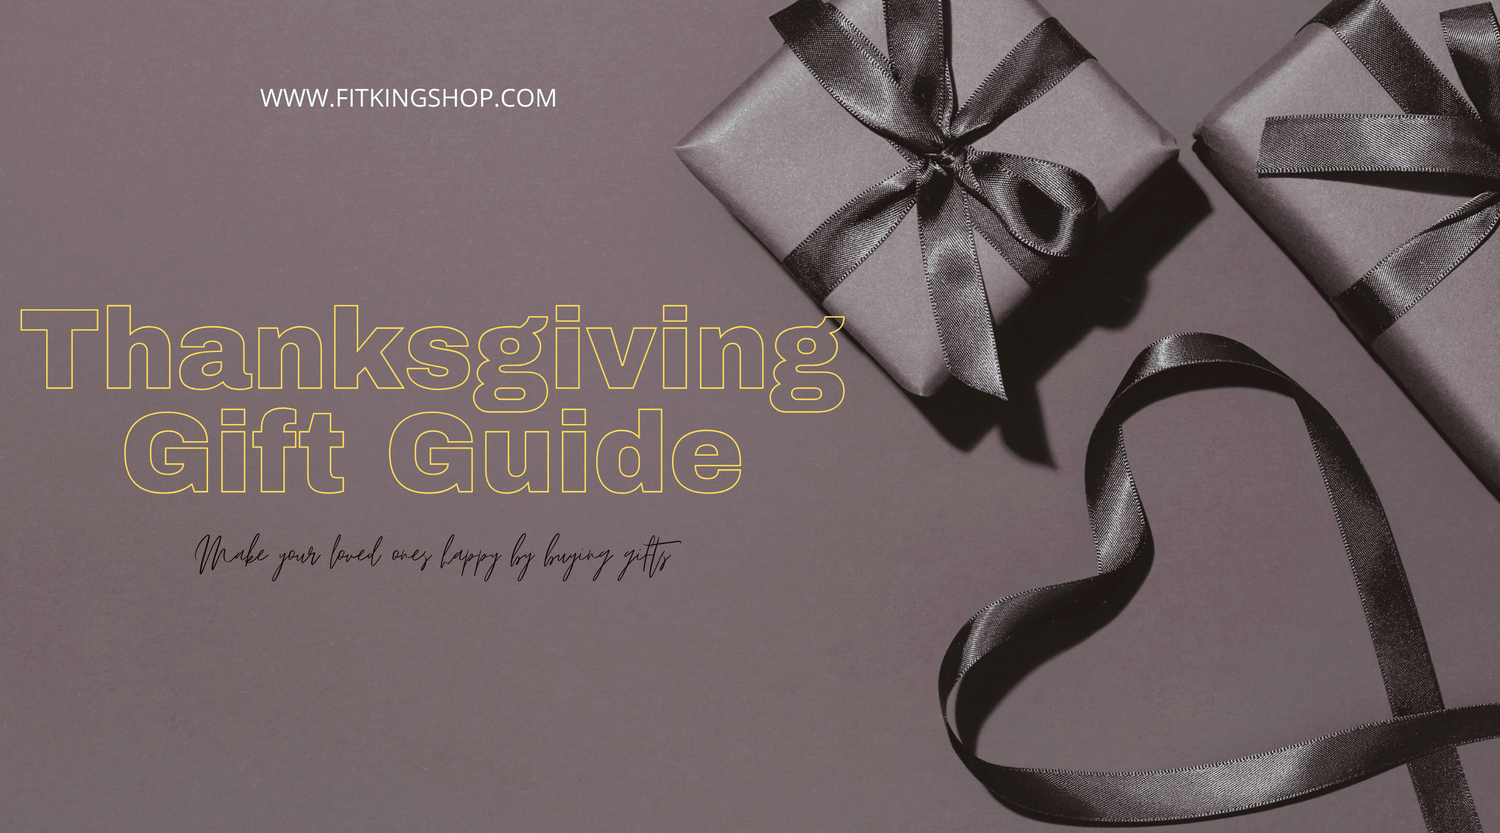 Thanksgiving Gift Guide: Unique and Thoughtful Gifts for Your Loved Ones